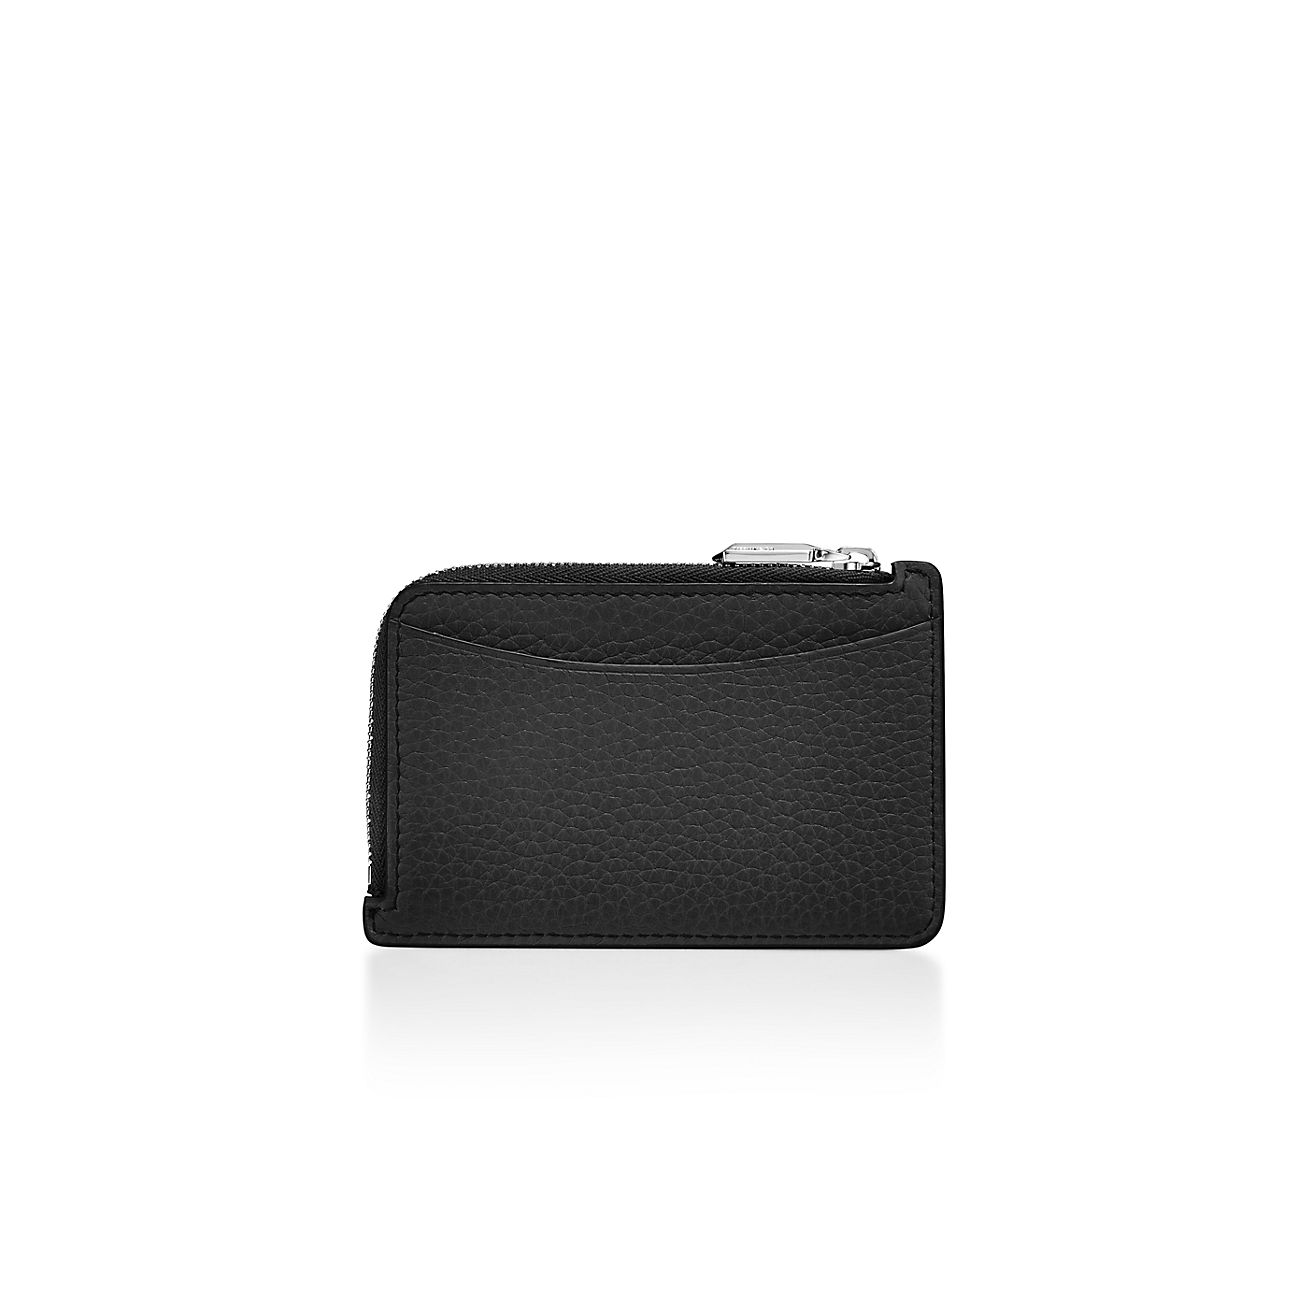 Return to Tiffany Zip Card Case in Black Leather